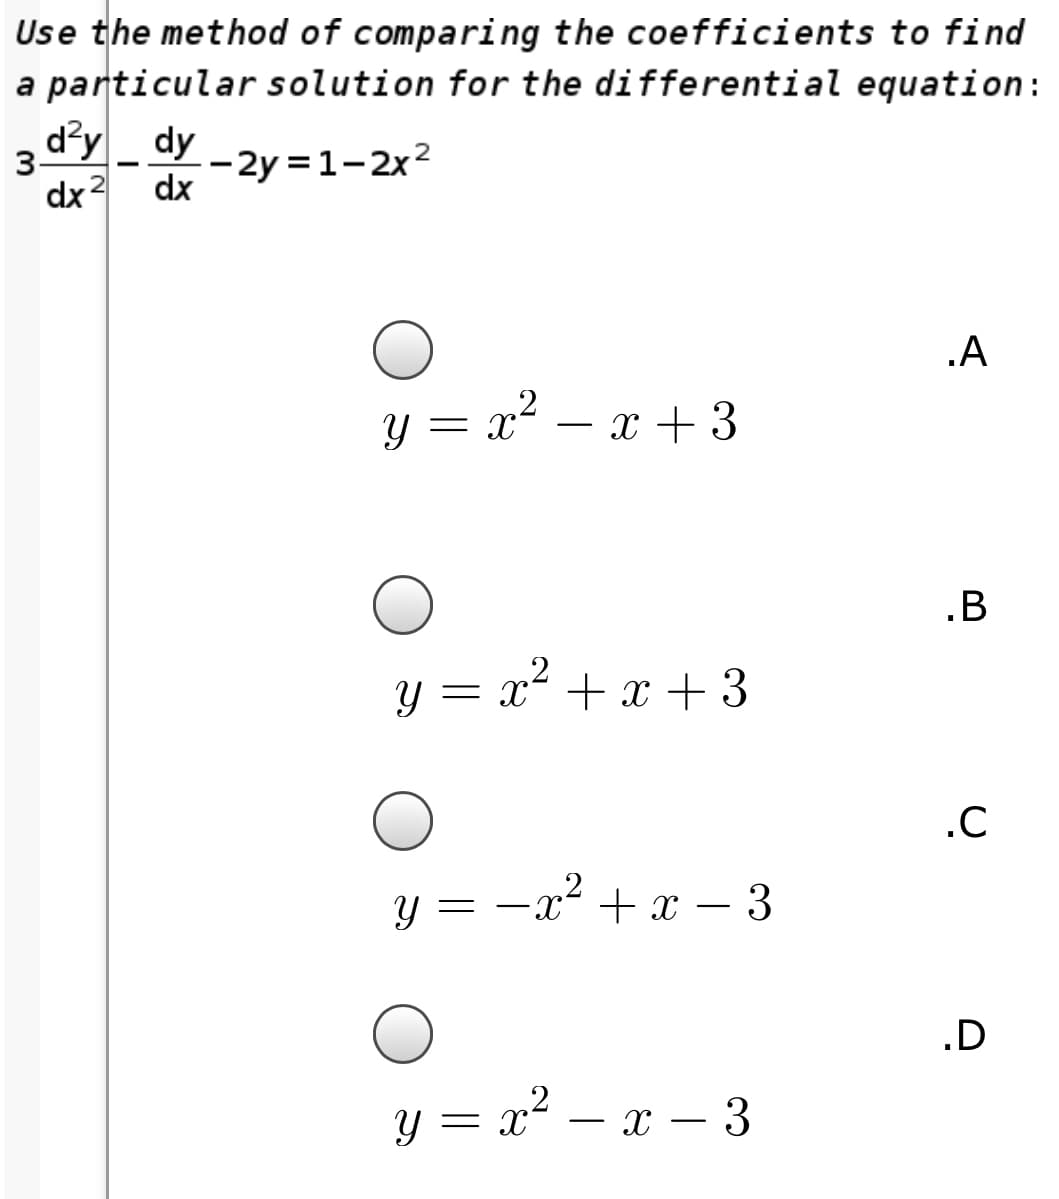 Use the method of comparing the coefficients to find
a particular solution for the differential equation:
d?y _ dy
--2y =1-2x²
dx
3
--
dx2
.A
y = x2 –
x + 3
-
.B
y = x² + x + 3
.C
y = -x + x – 3
.D
Y = x – x – 3
